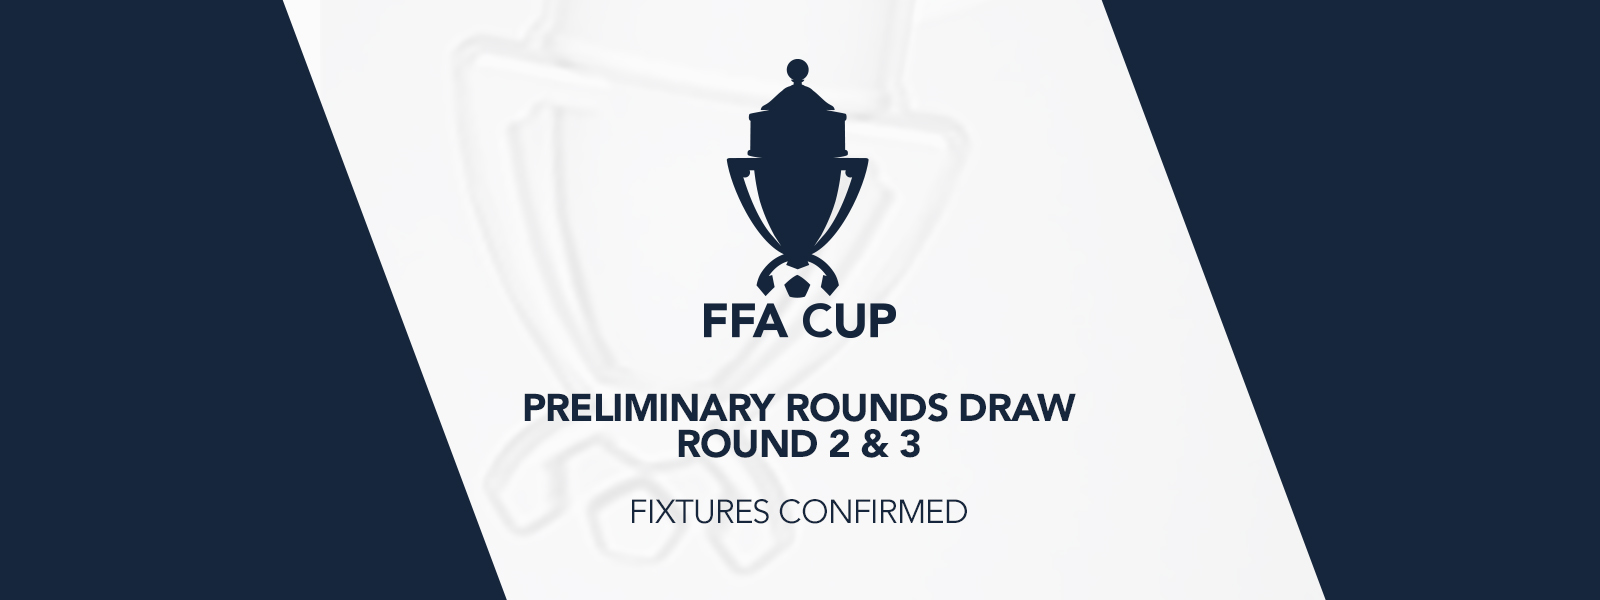 FFA Cup Round 2 and 3 fixtures confirmedInsert/edit link